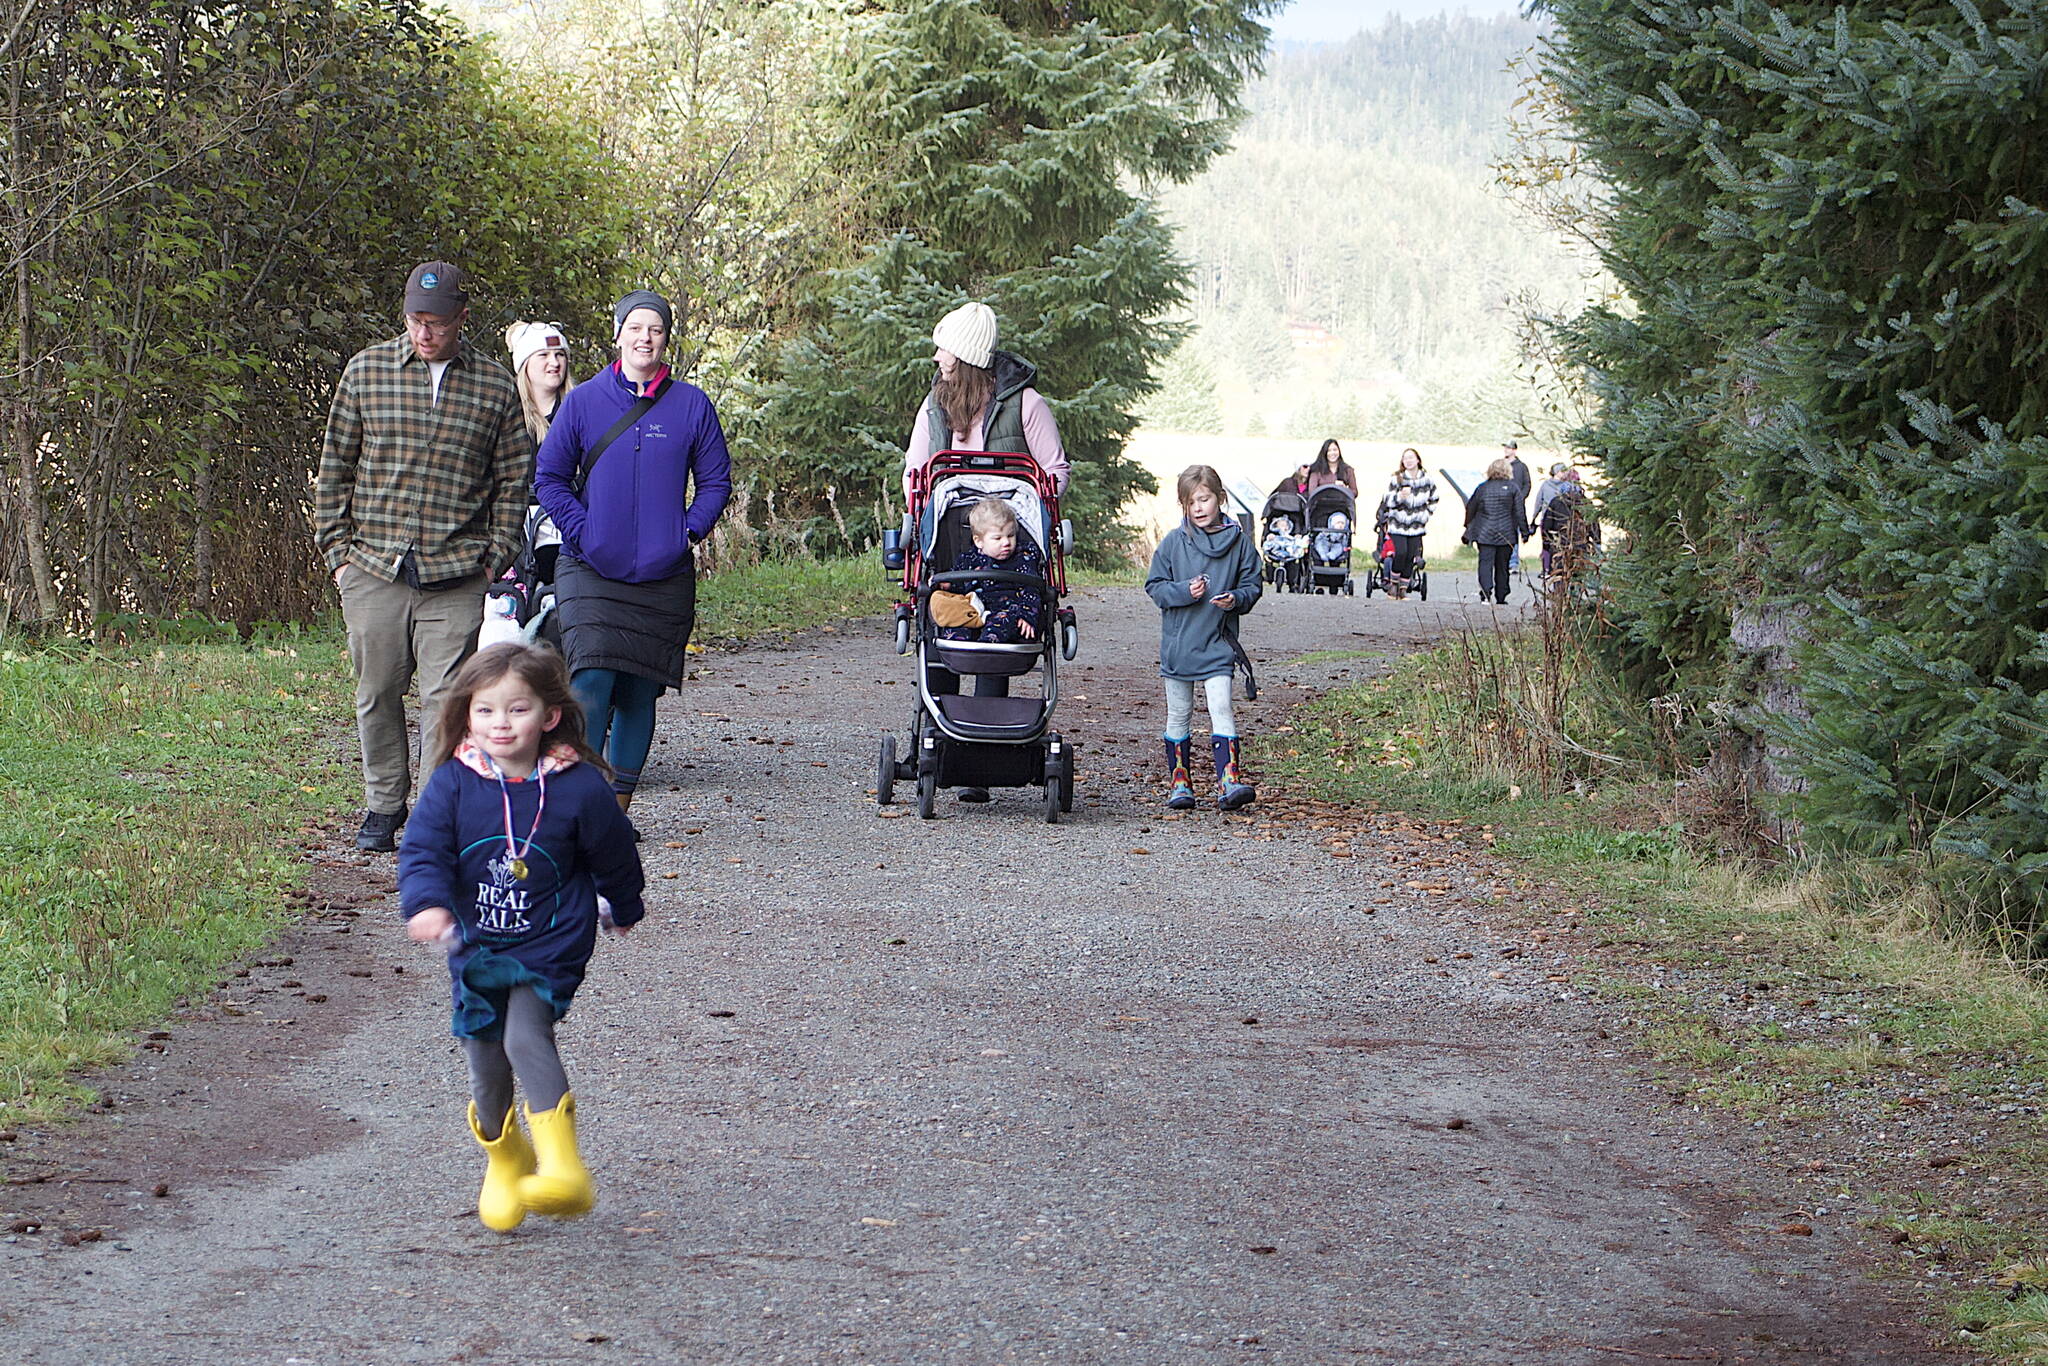 Lily Levy, 3, dashes ahead of her family during the one-mile walk portion of the second annual Real Talk Walk/Run on Saturday at the Airport Dike Trail. (Mark Sabbatini / Juneau Empire)